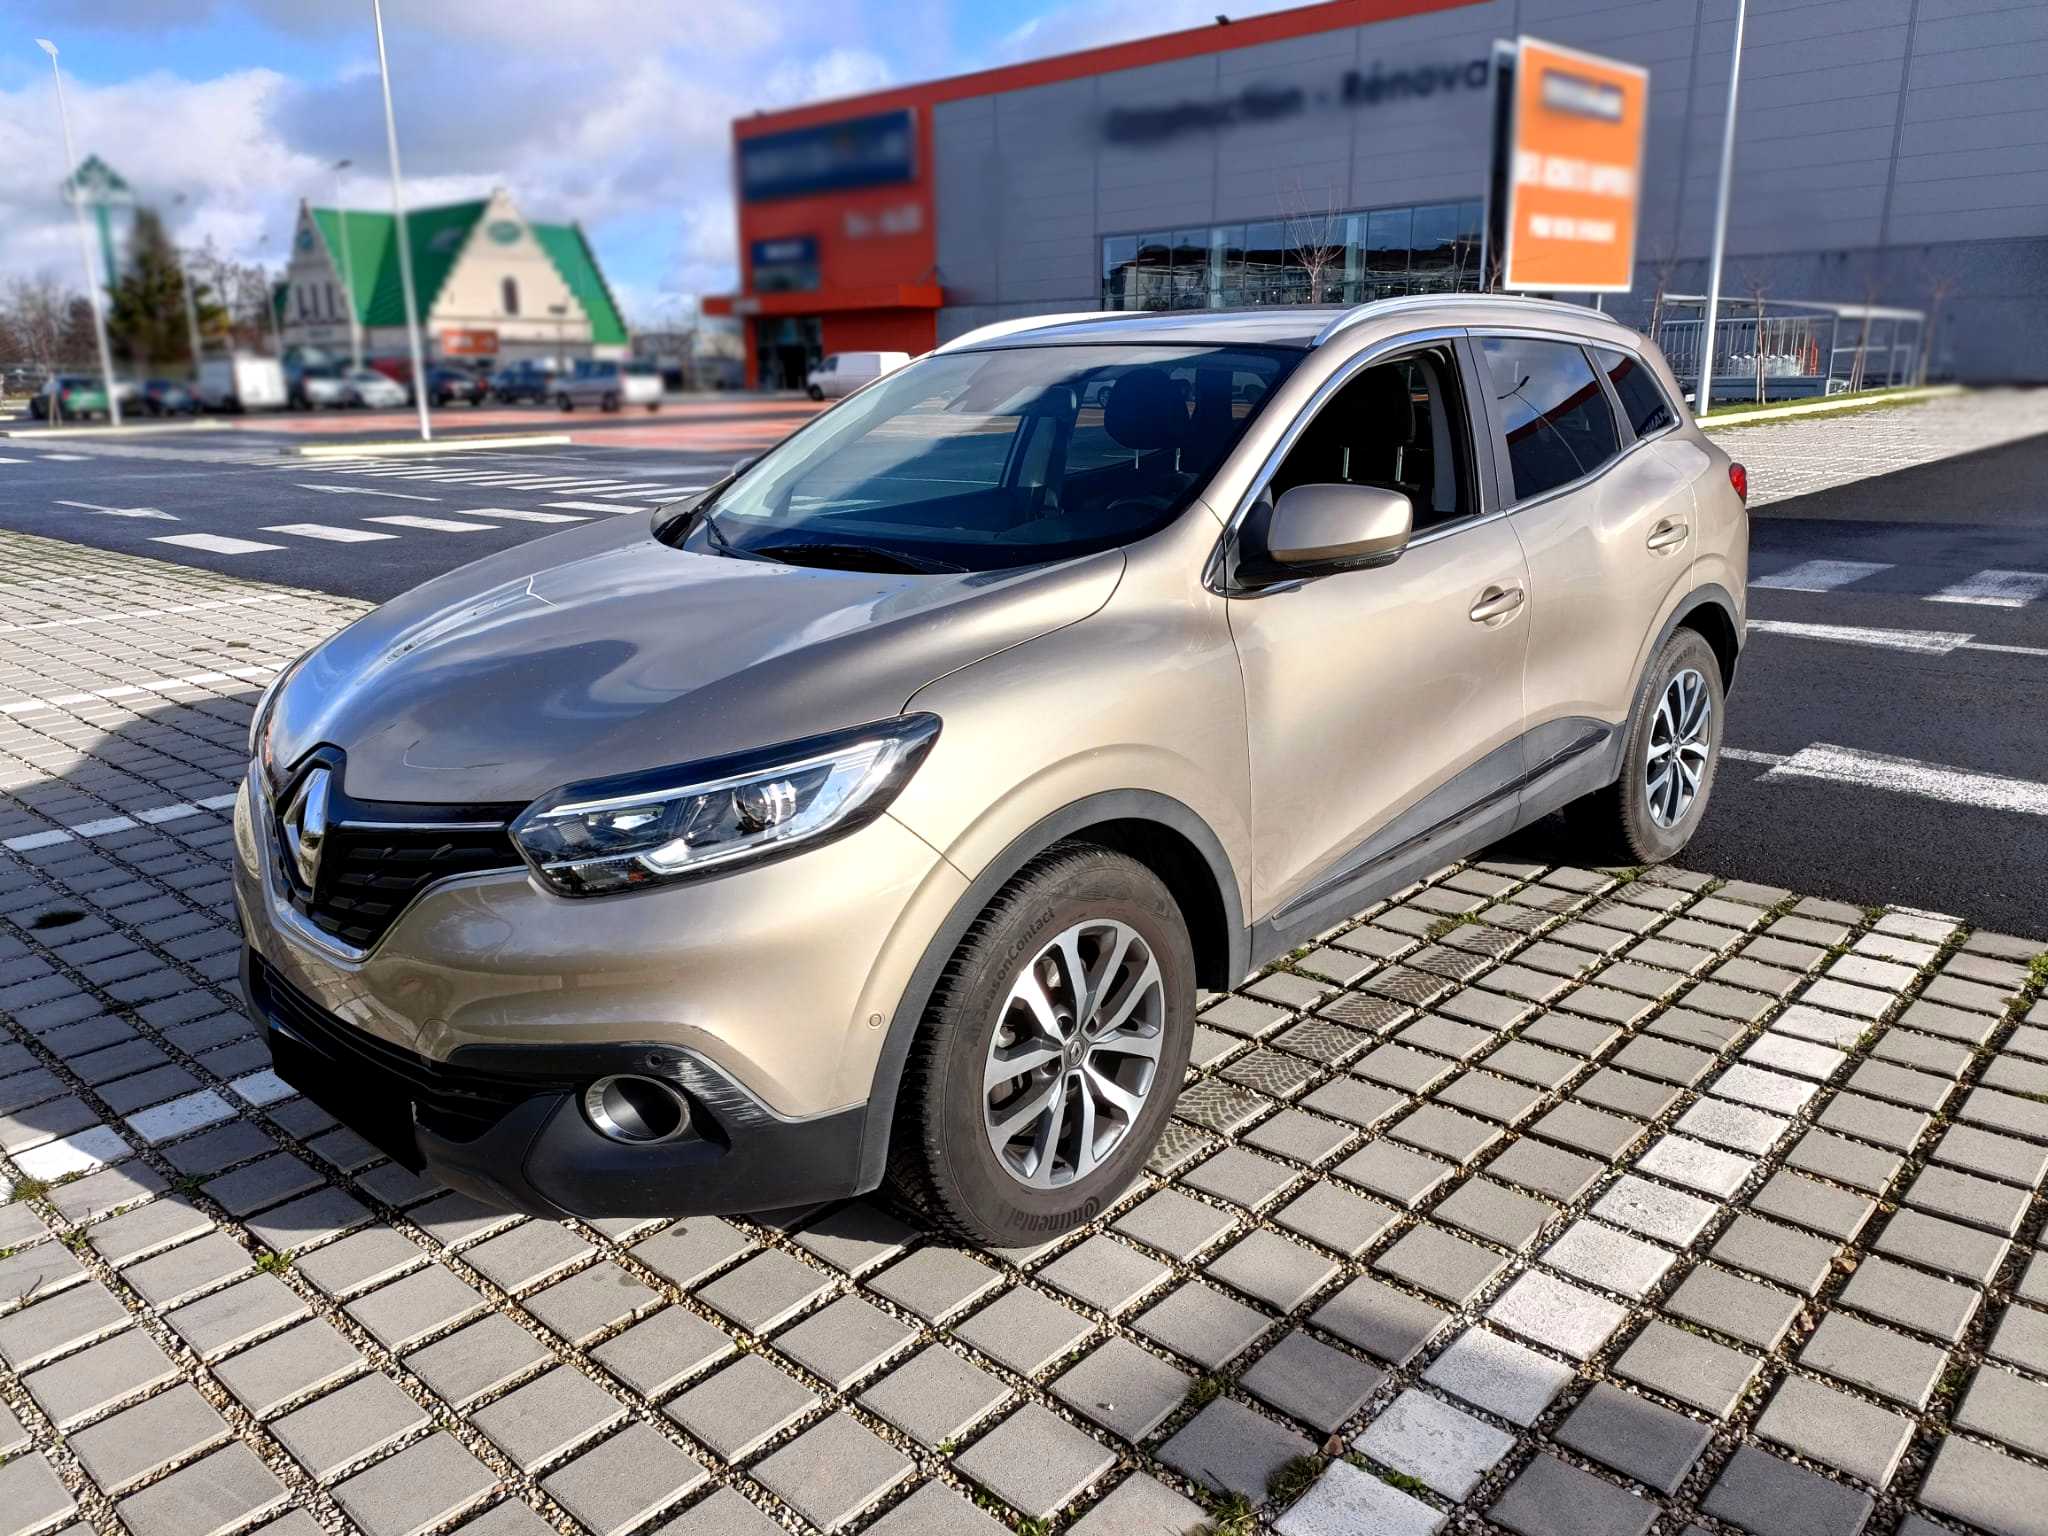 You are currently viewing Renault Kadjar 1.5 dCi 110 ch boite auto EDC